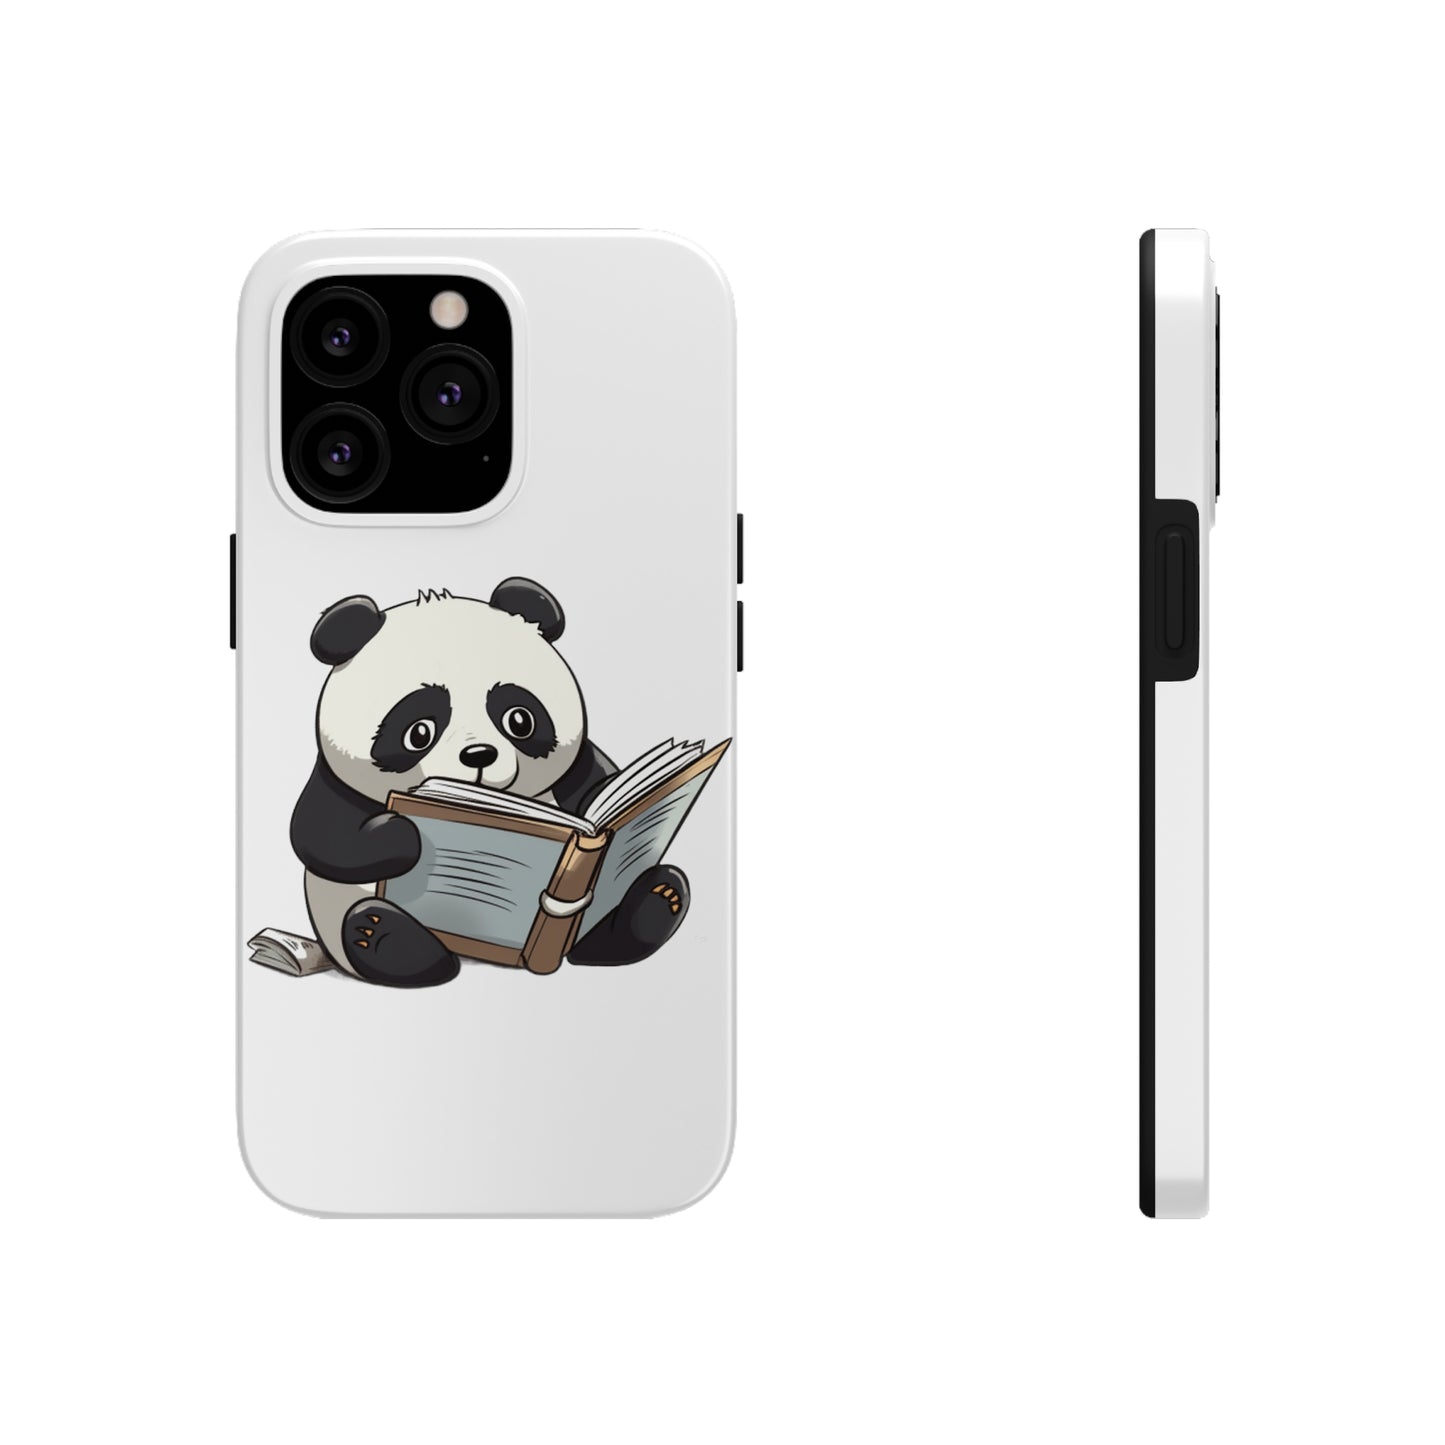 Tough Phone Cases with a print on it of A studious panda engrossed in a humorous pun book:

Panda